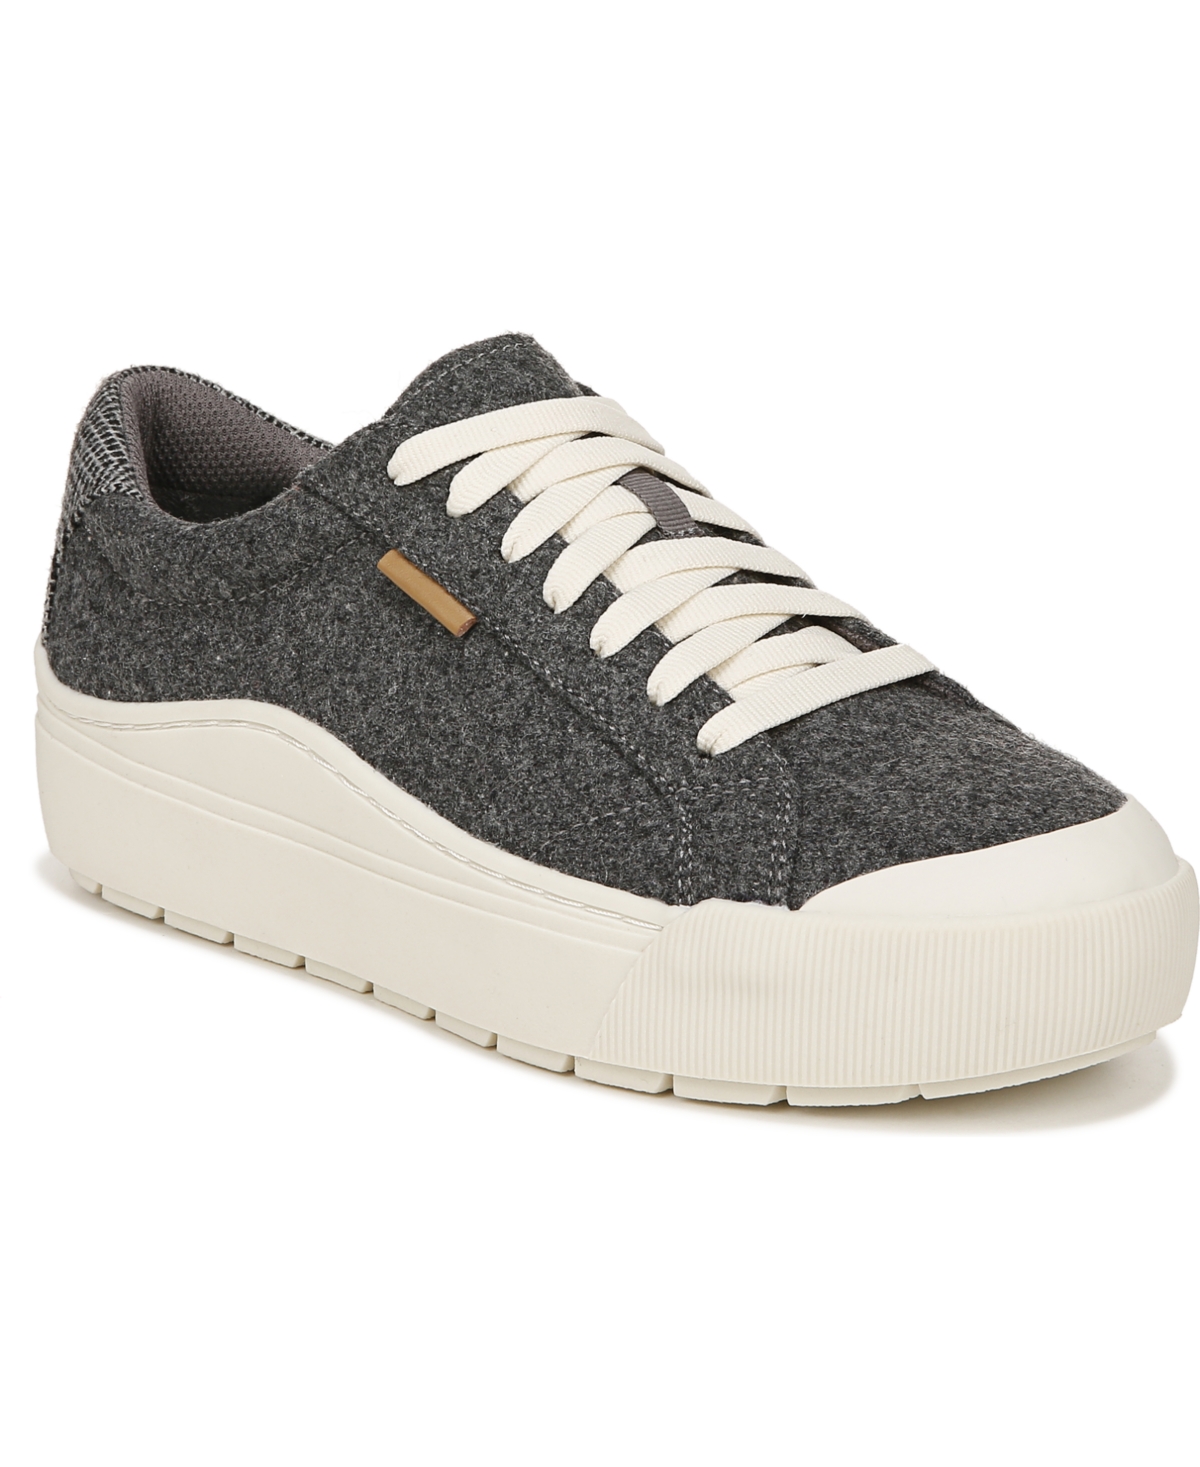 Dr. Scholl's Women's Time Off Platform Sneakers In Charcoal Fabric